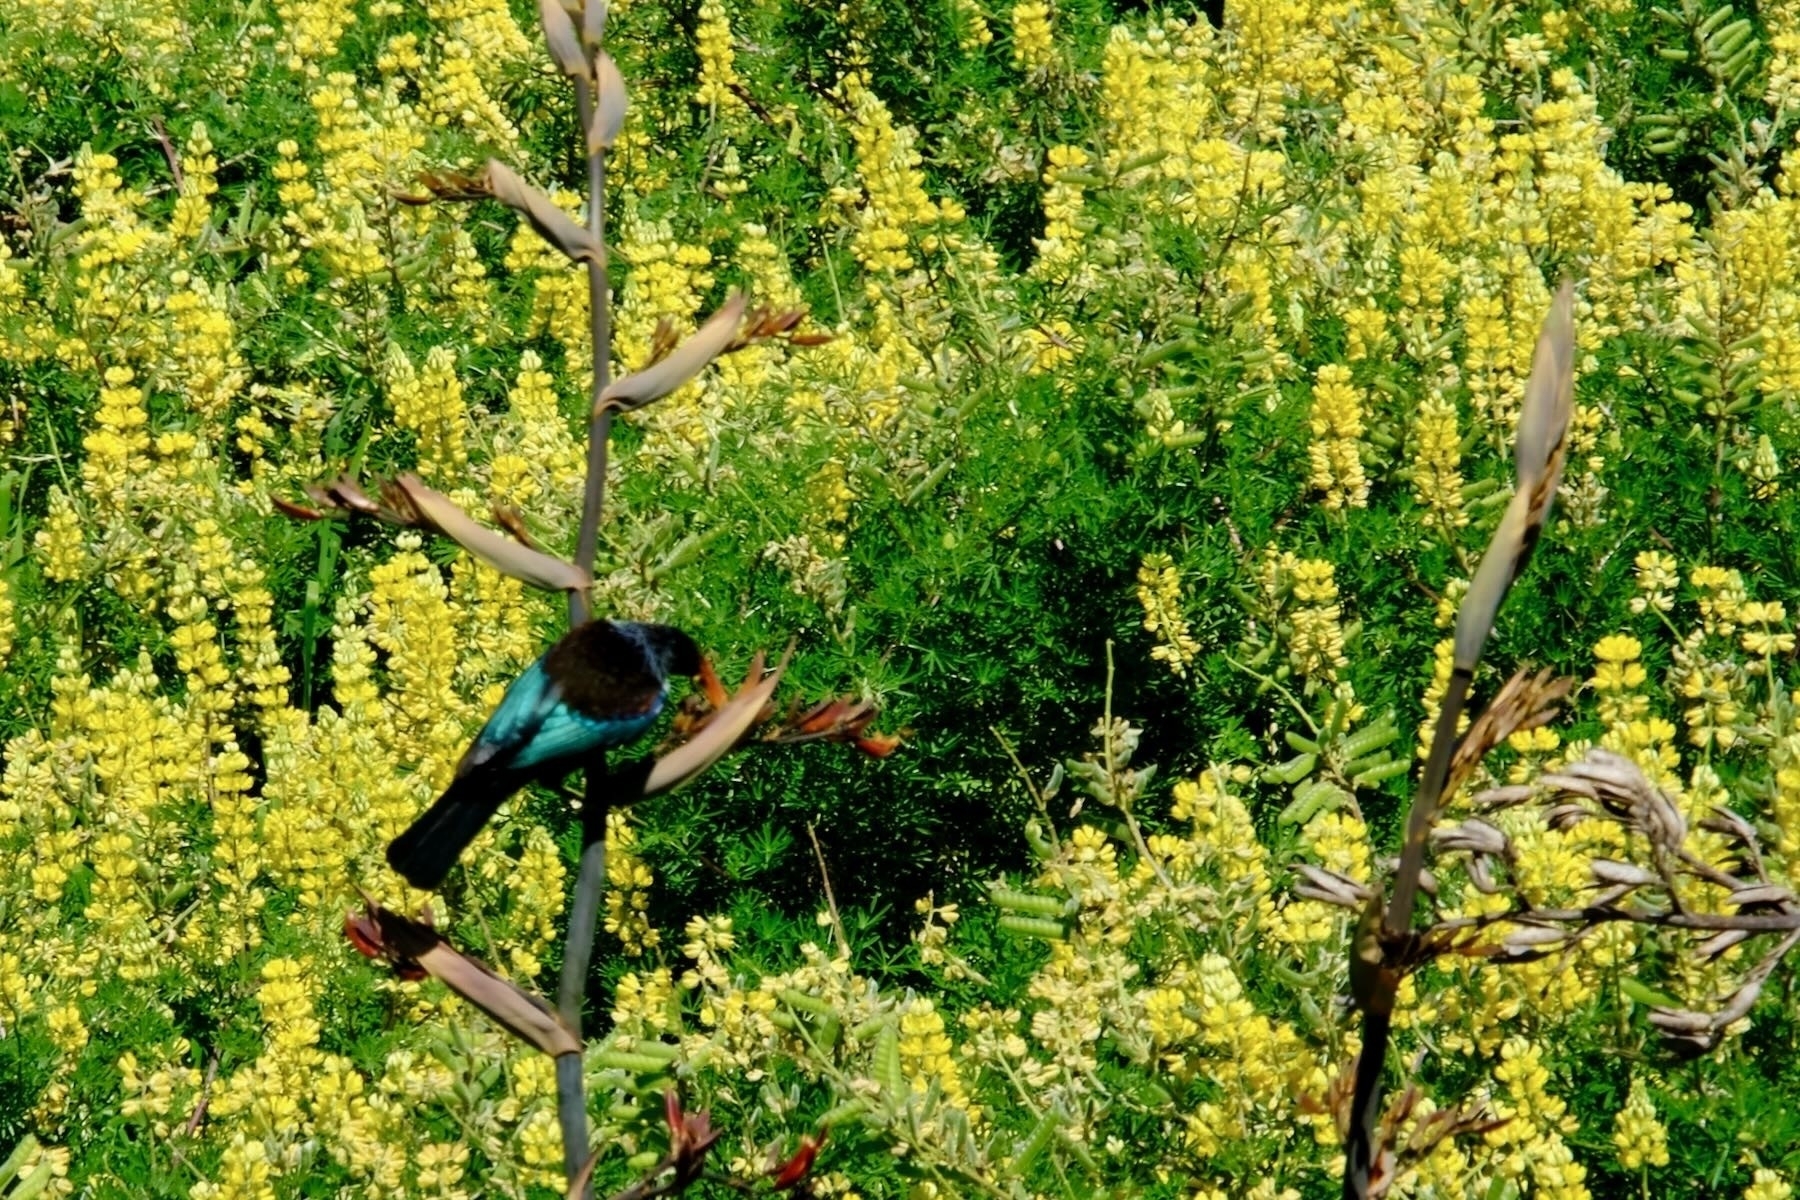 Tui on flax spears with yellow lupins behind. 